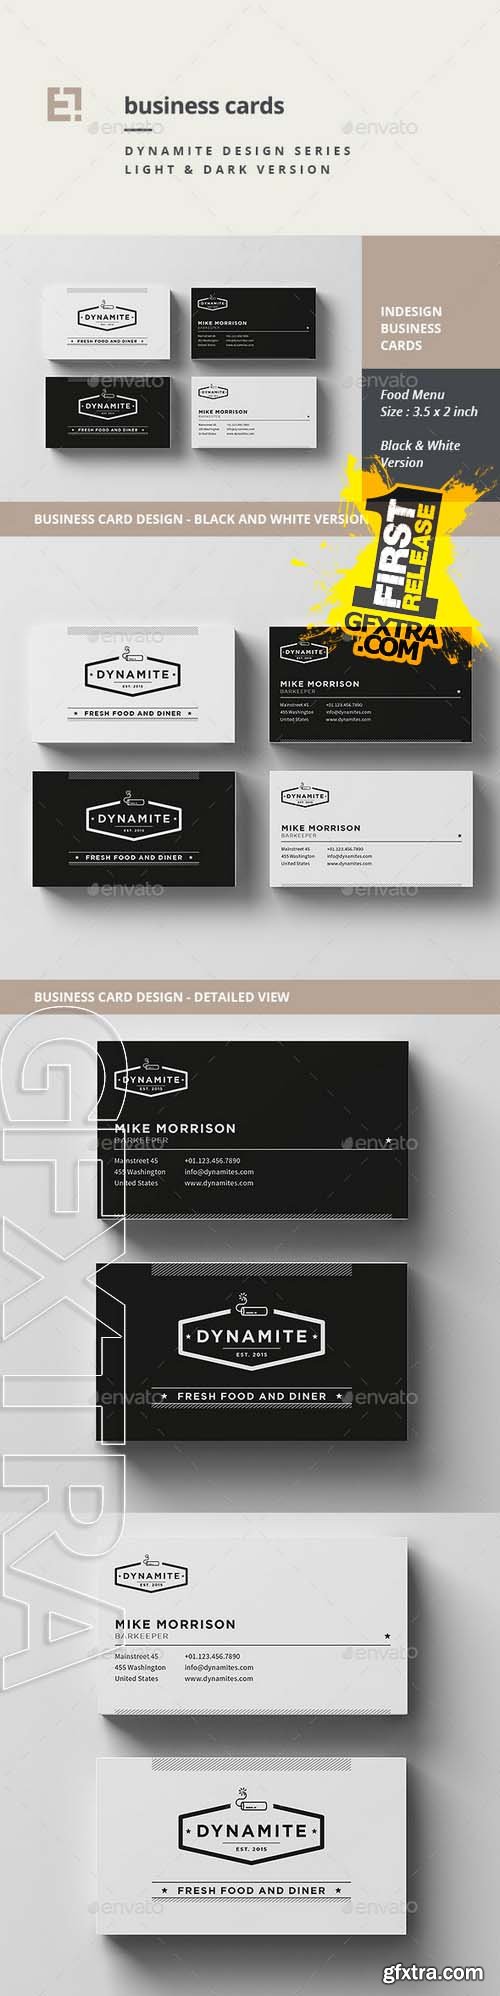 Business Cards - Graphicriver 11181942